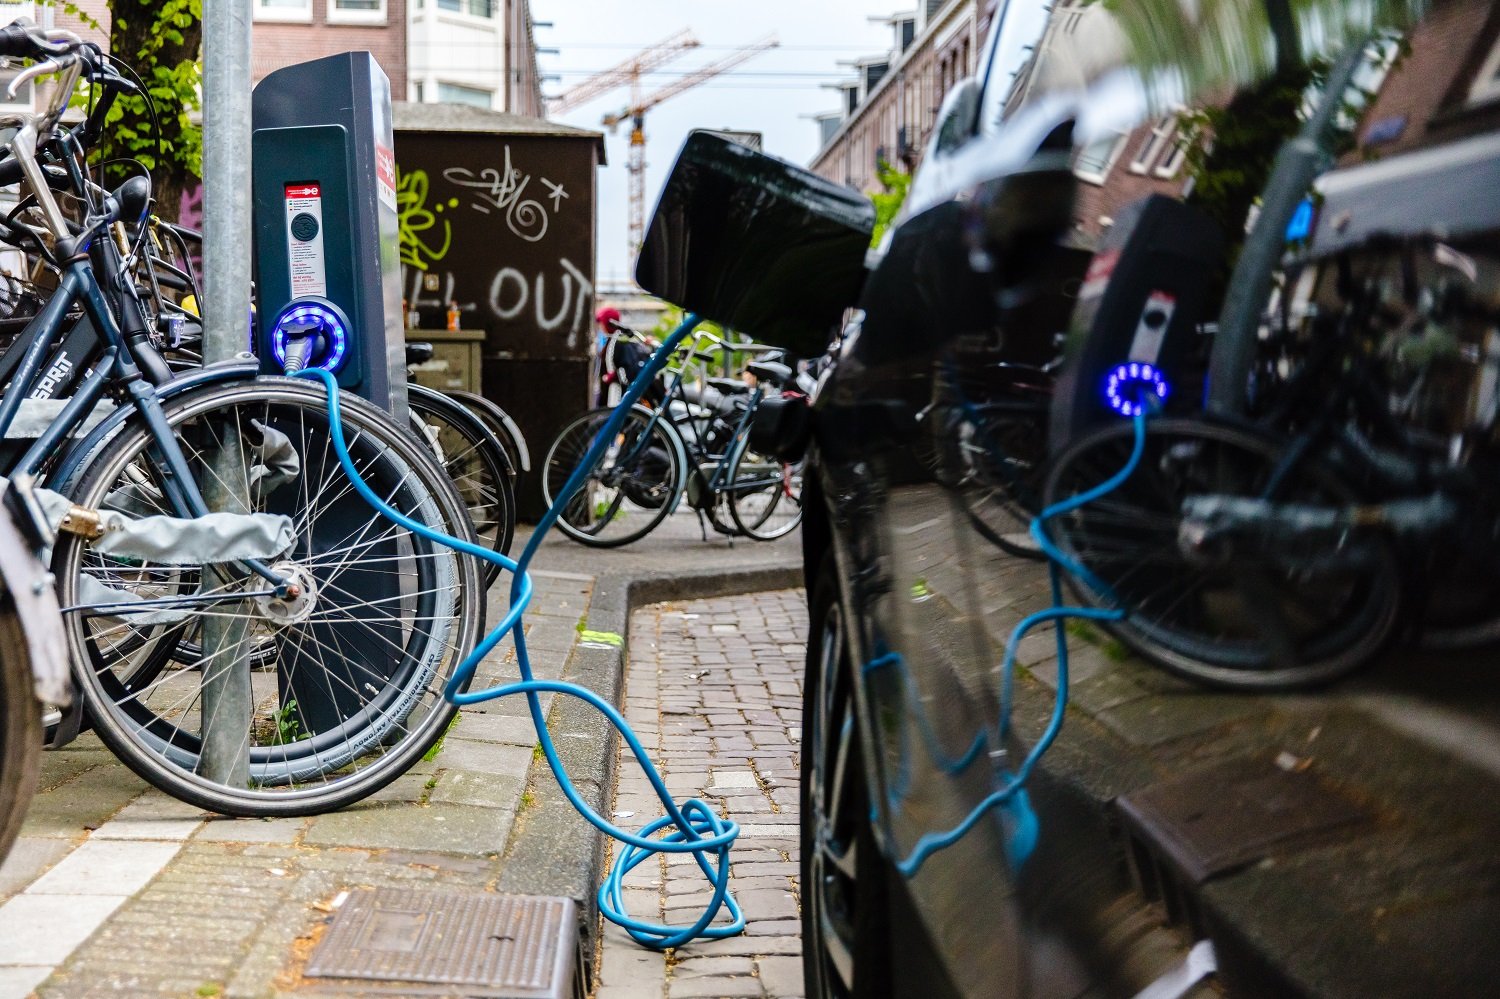 17_FLATANGLE_AMSTERDAM_PARKED CAR_CHARGING STATION_3